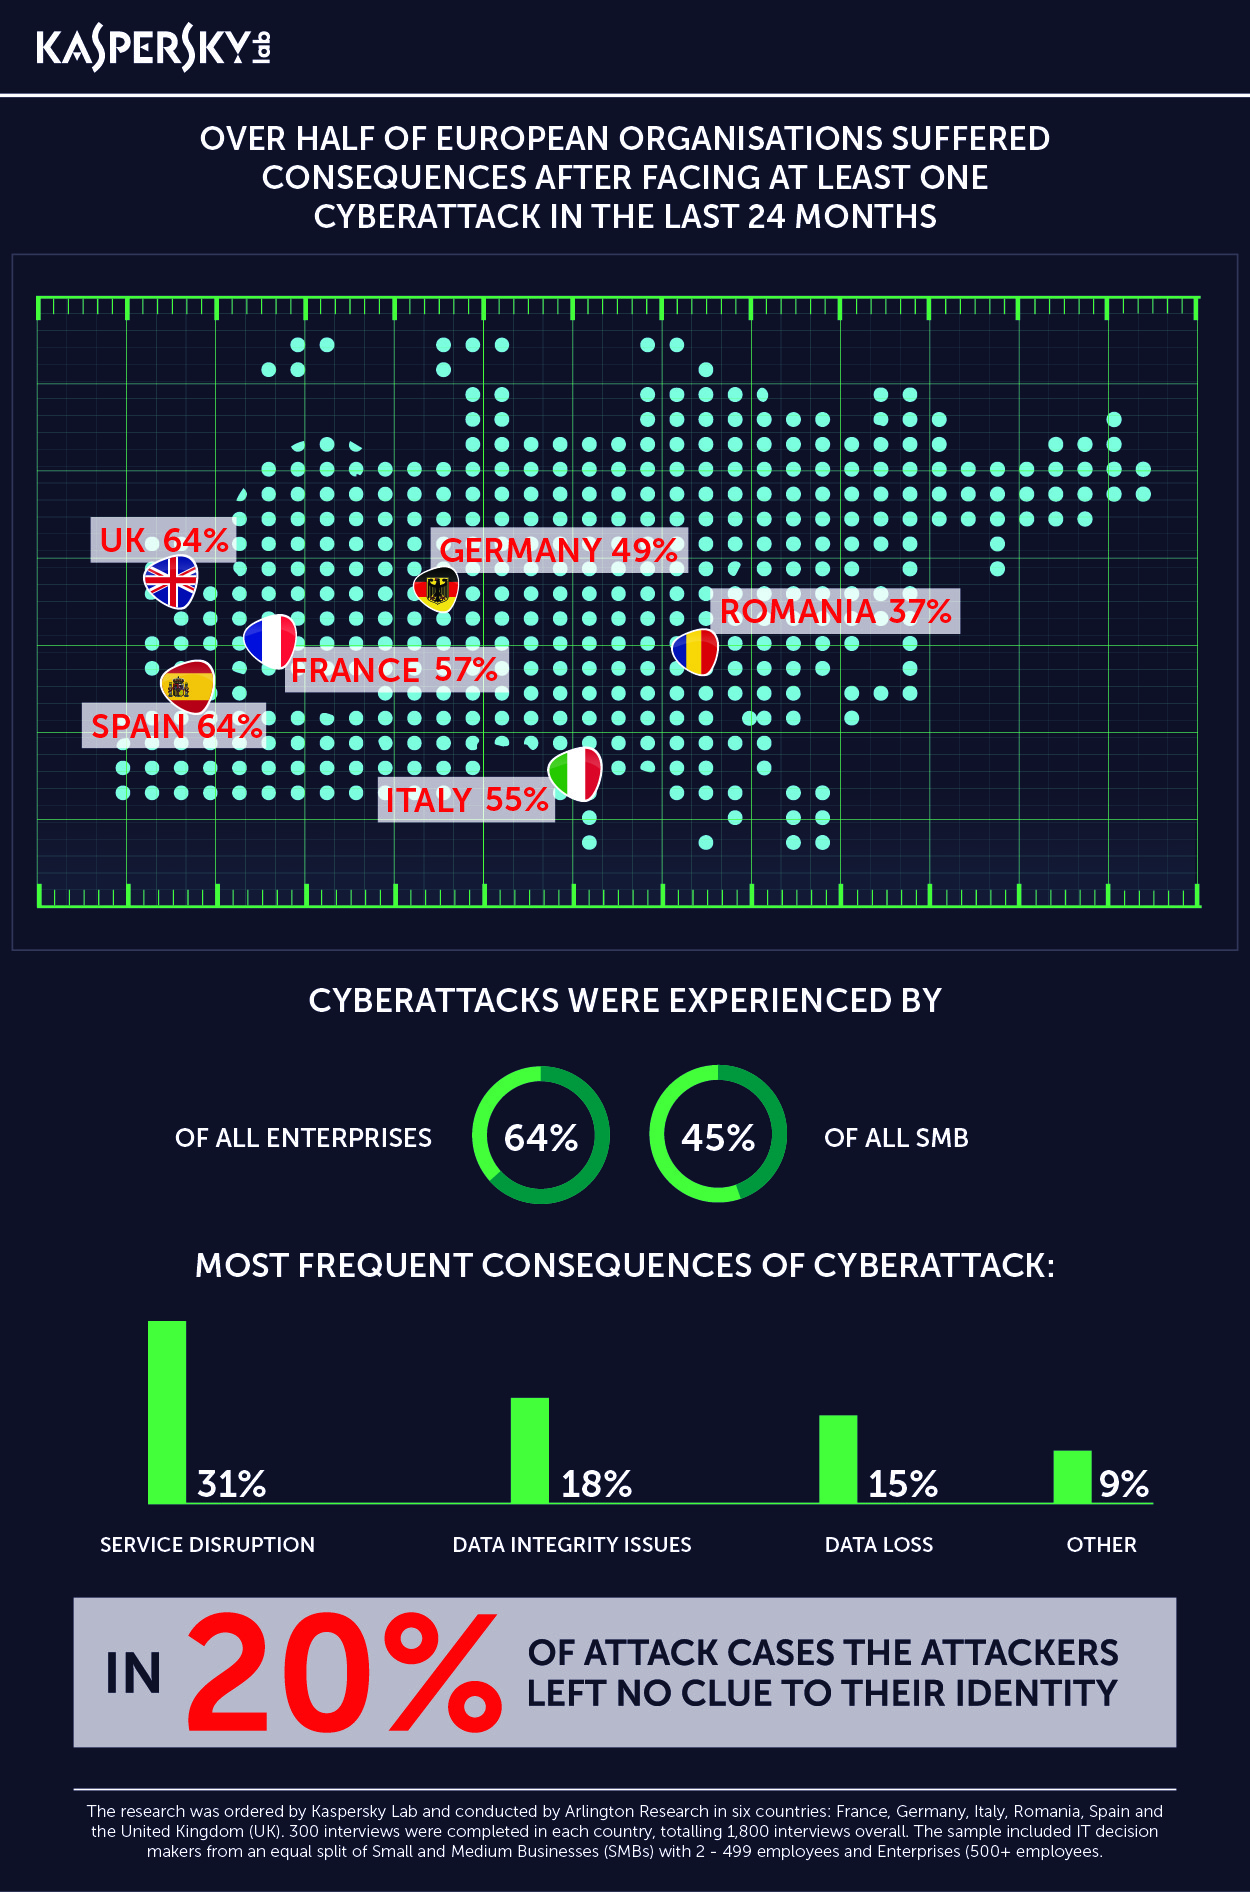 Kaspersky_cyberattack_infographic-01